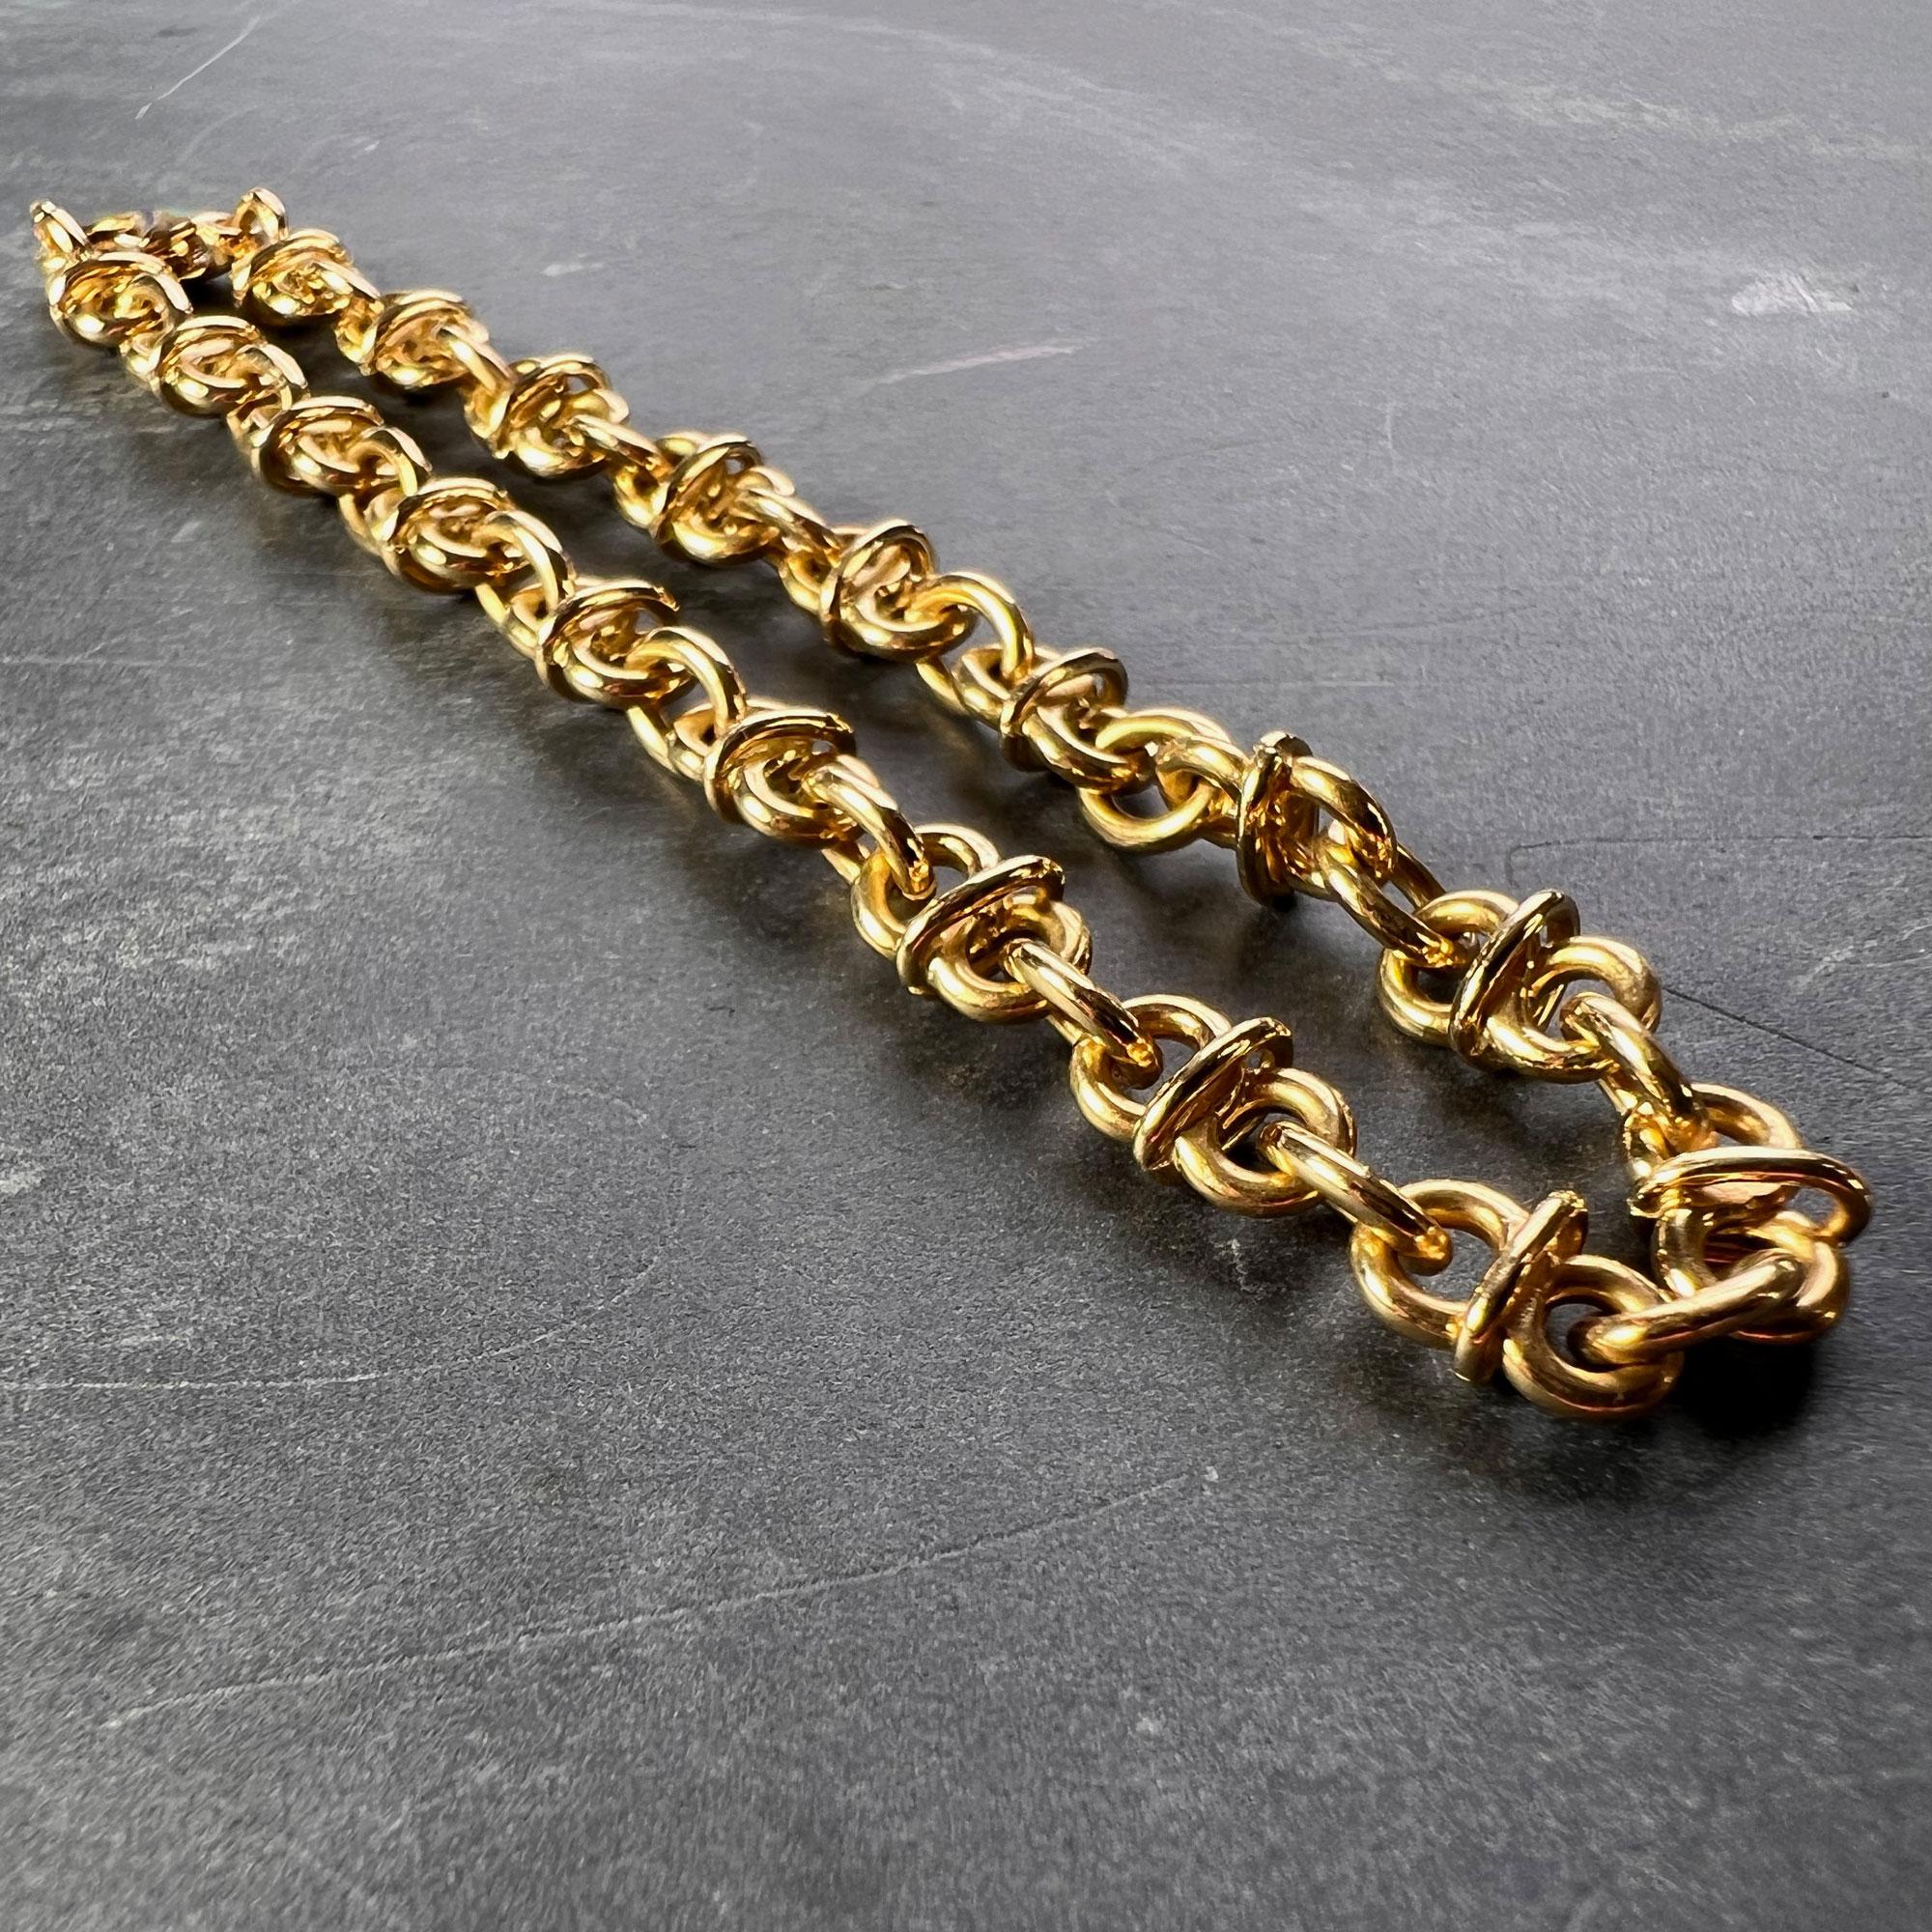 An 18 karat (18K) yellow gold mariner chain link bracelet. Stamped 750 for 18 karat gold with marks for Italian manufacture. Lobster clasp closure. 7.5 inches long. 

Dimensions: 19 x 0.6 x 0.5 cm
Weight: 15.67 grams 